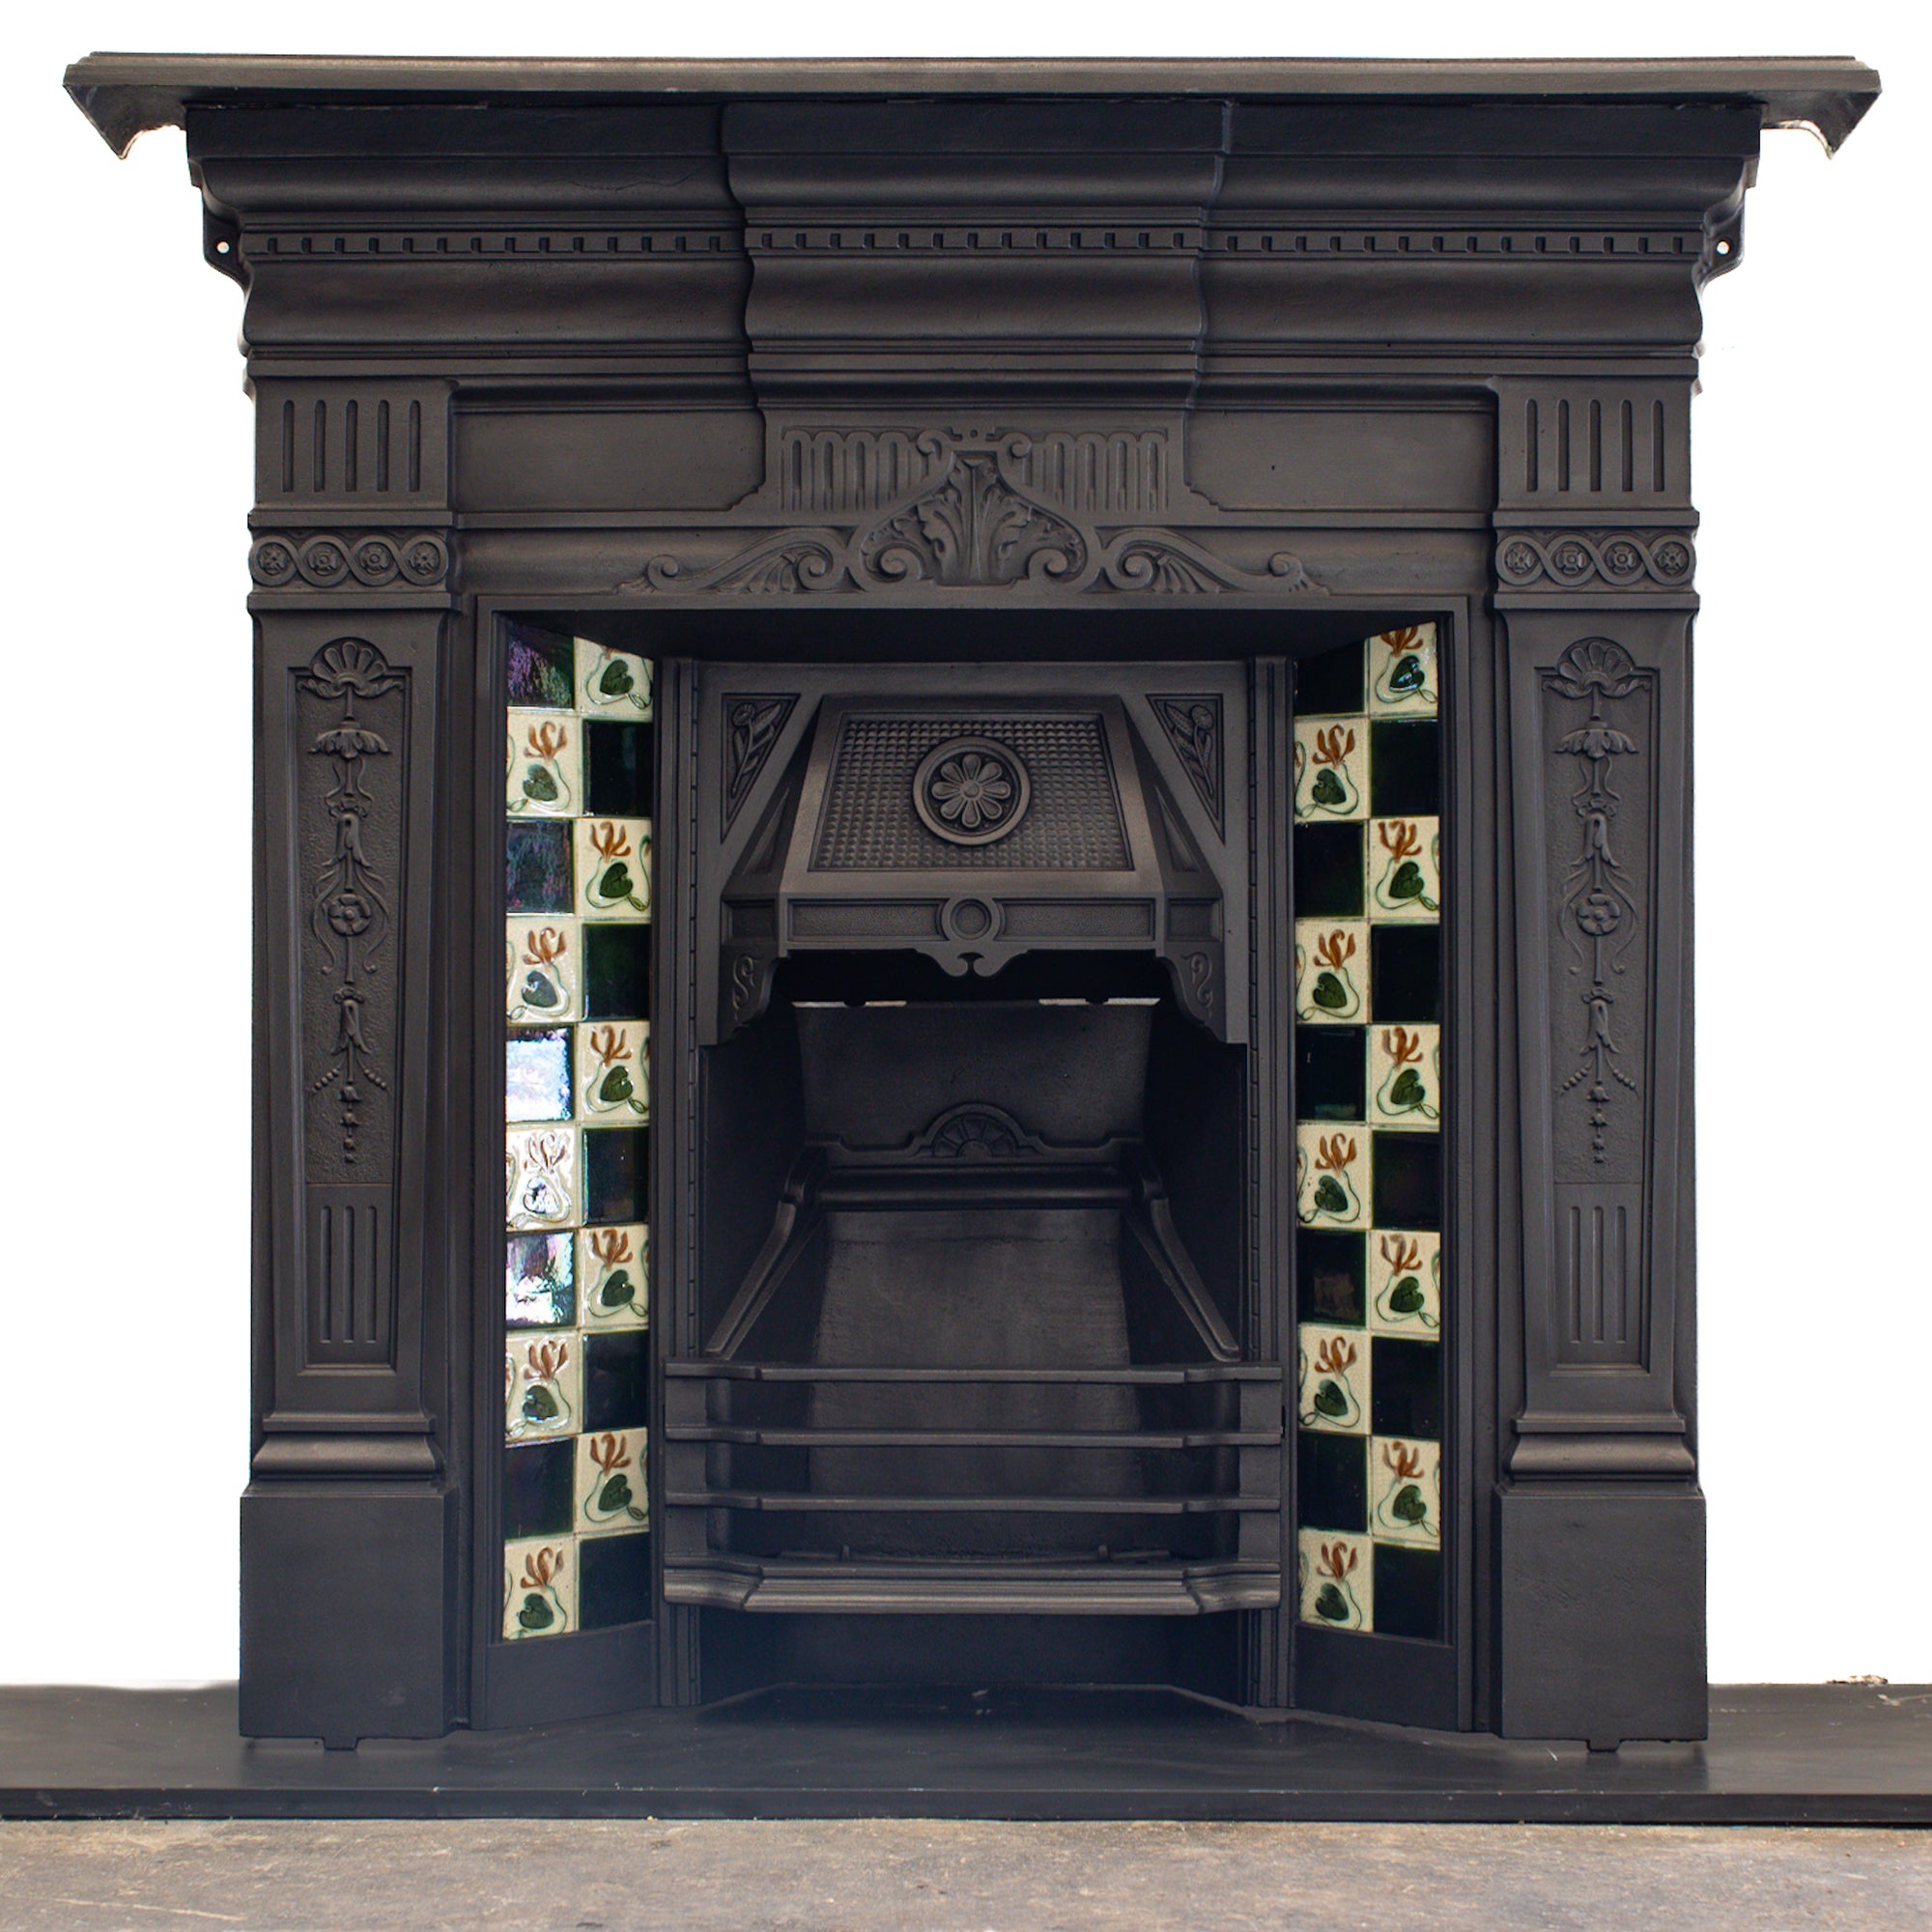 Antique Cast Iron Tiled Combination Fireplace | The Architectural Forum